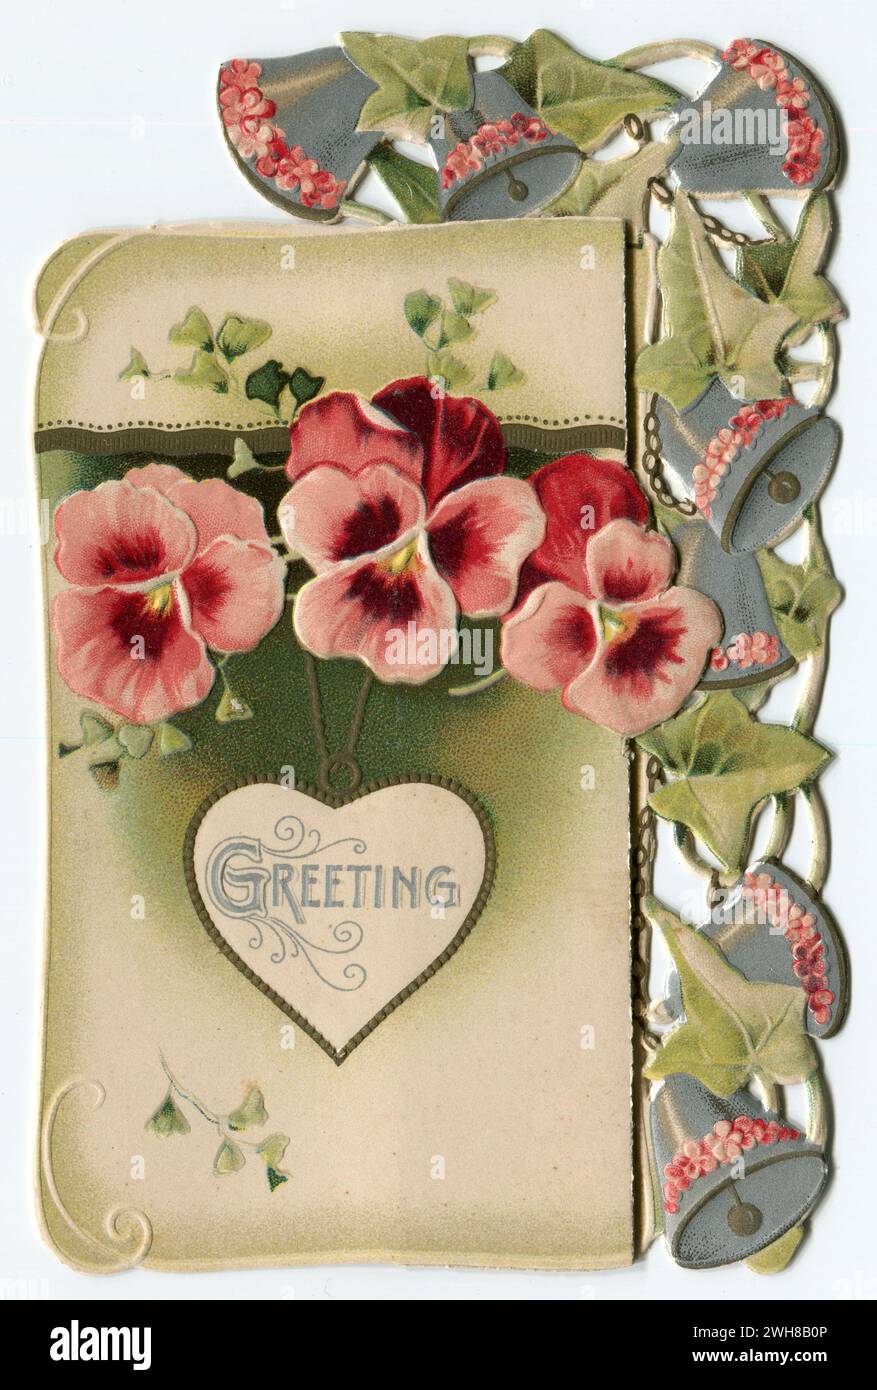 An antique Victorian Valentine’s Day greetings card depicting flowers, bells and ivy with the word “Greeting” within a heart-shaped pendant. Stock Photo